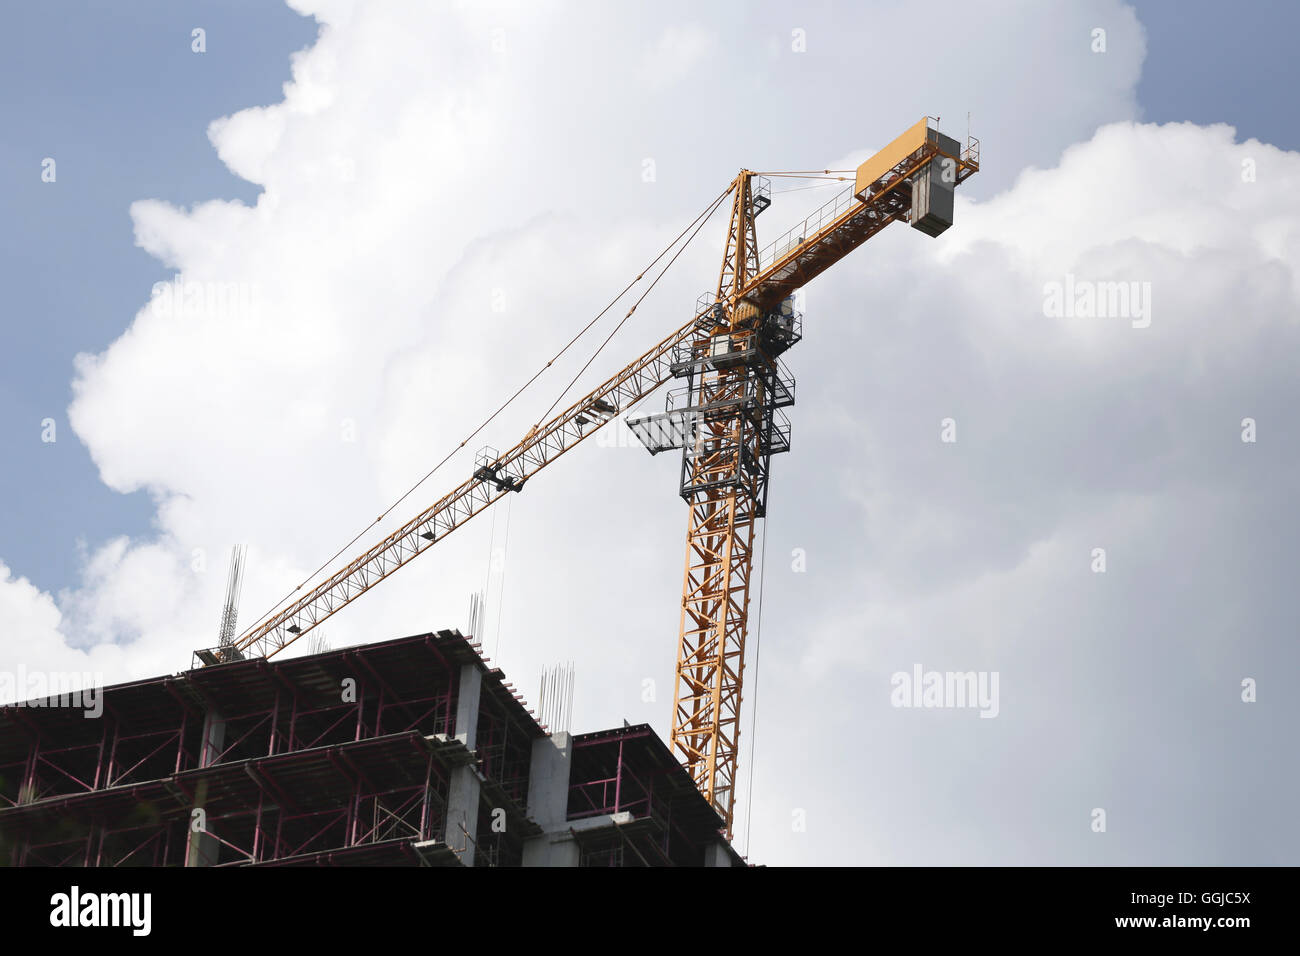 Crane working on a building under construction in day time. Stock Photo